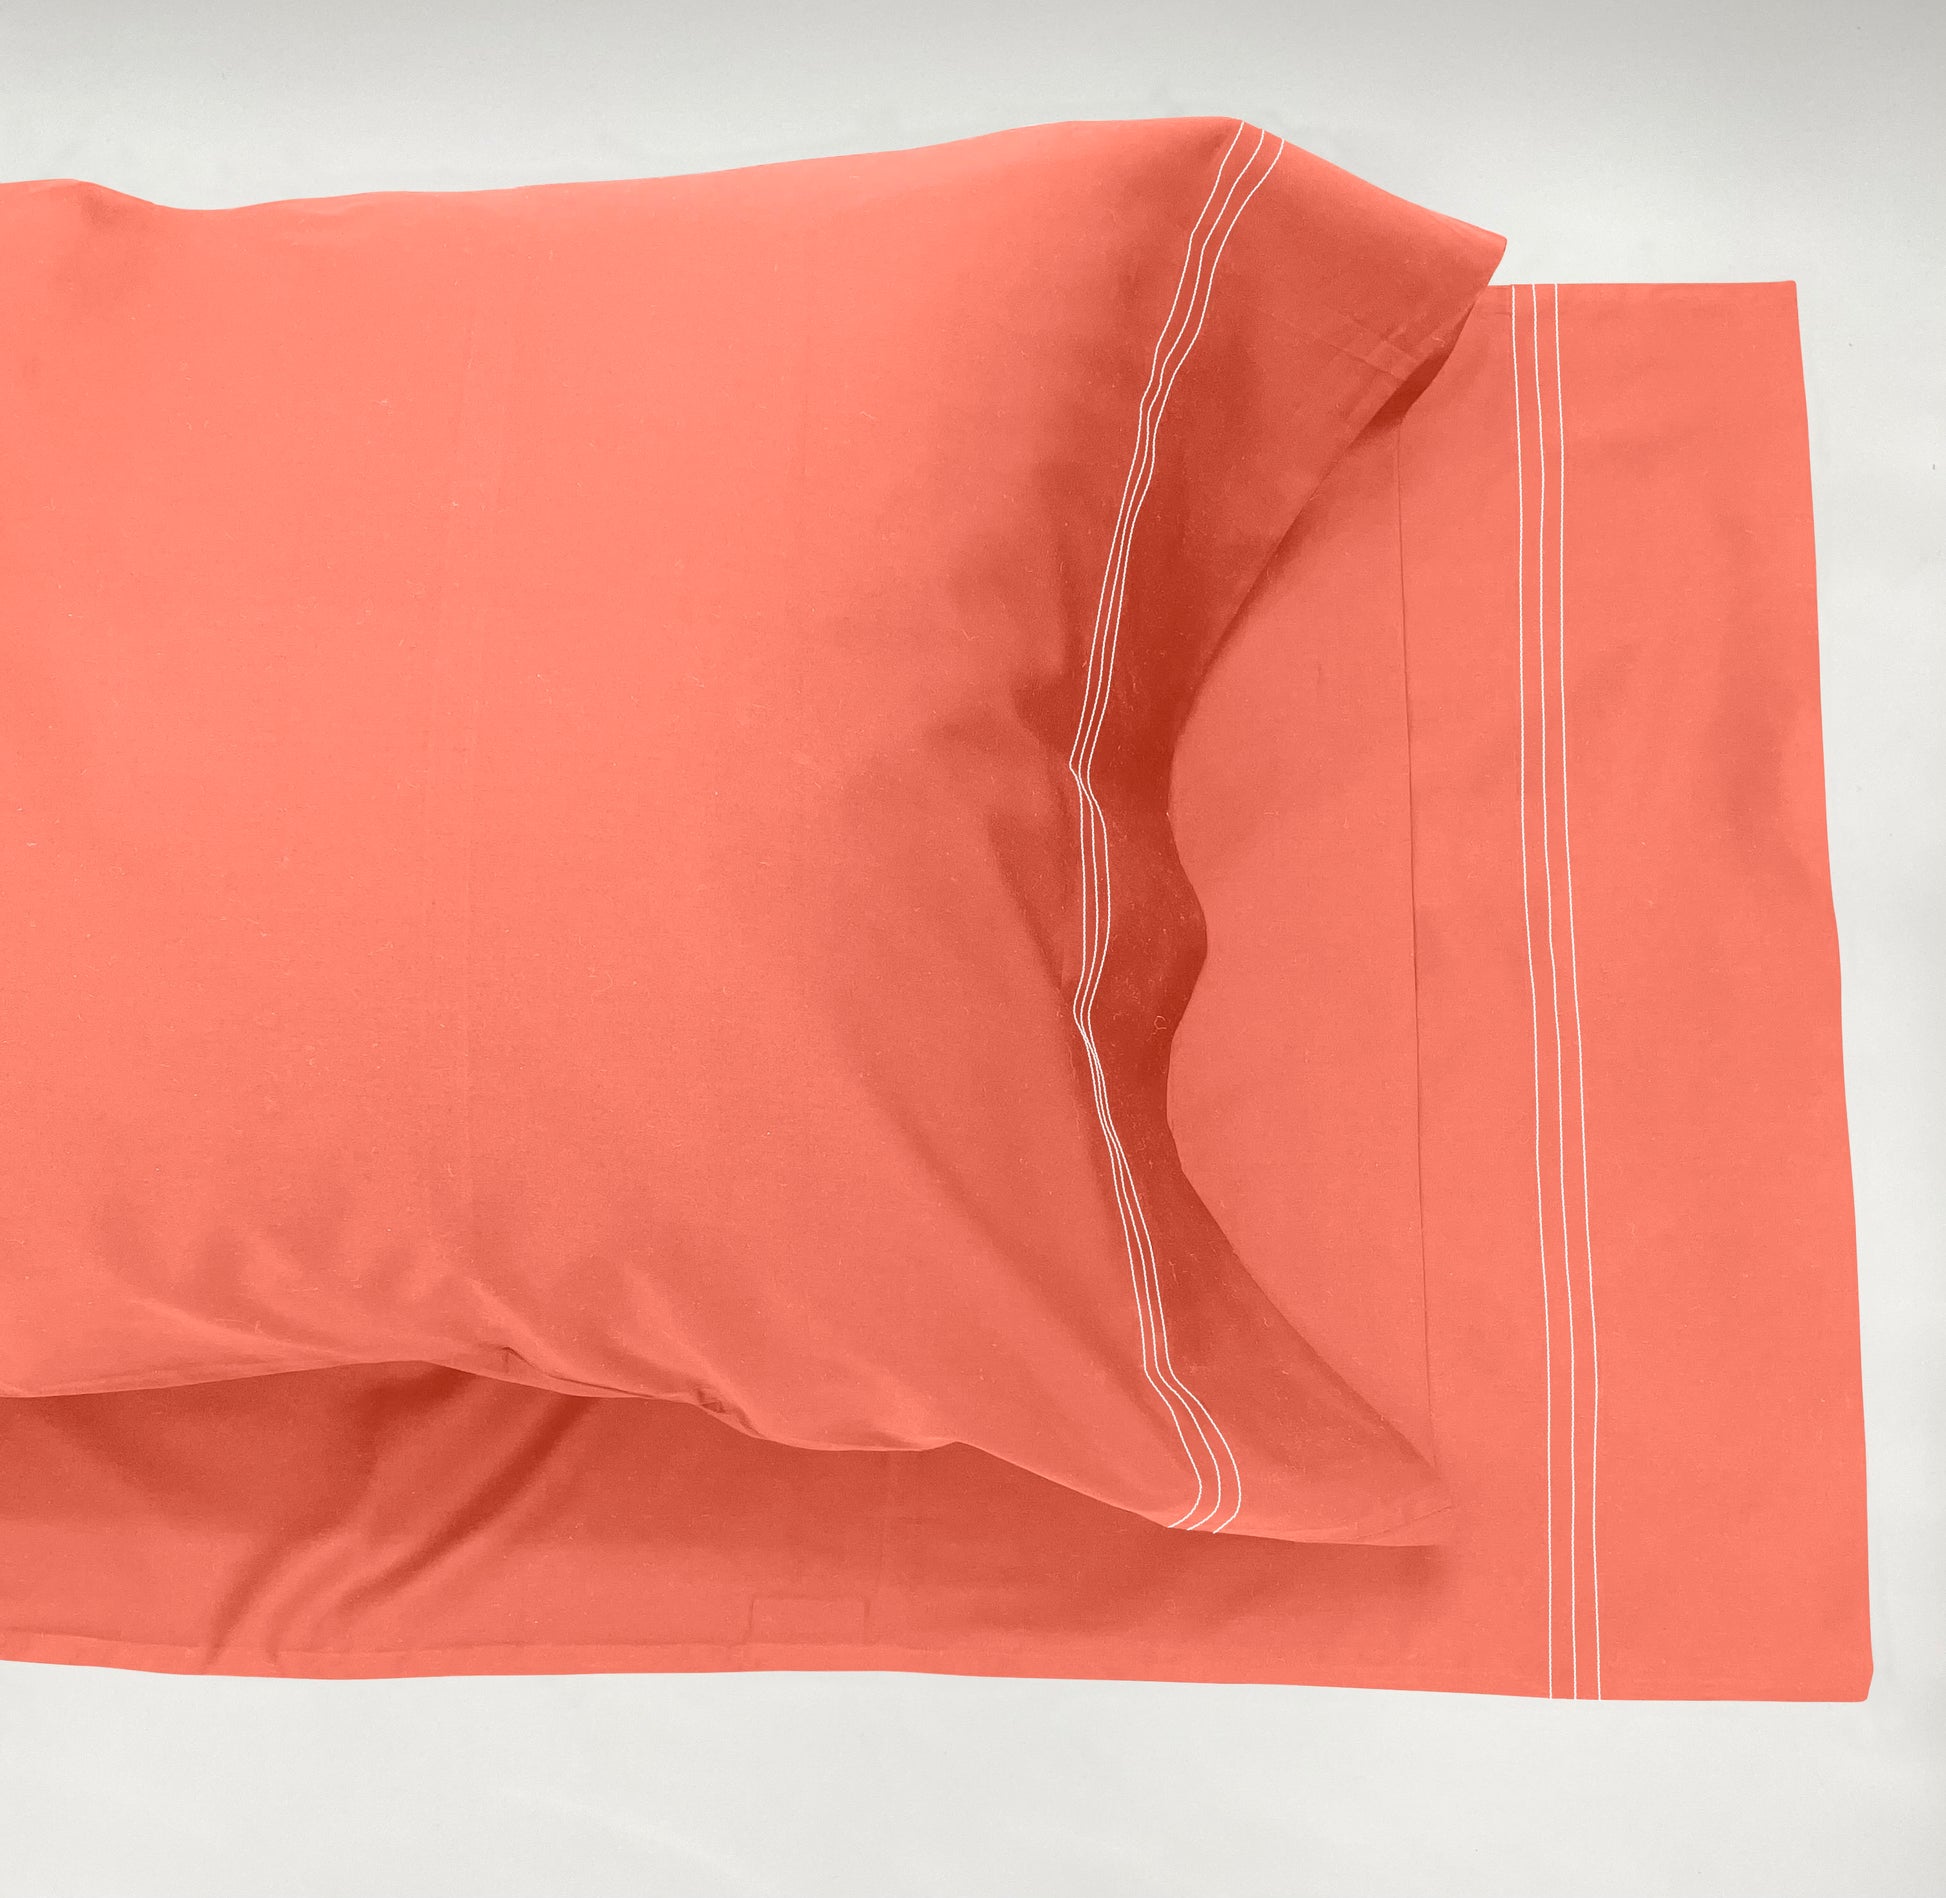 Narragansett Lobster Pillow Case with a triple contrasting stitch in White.